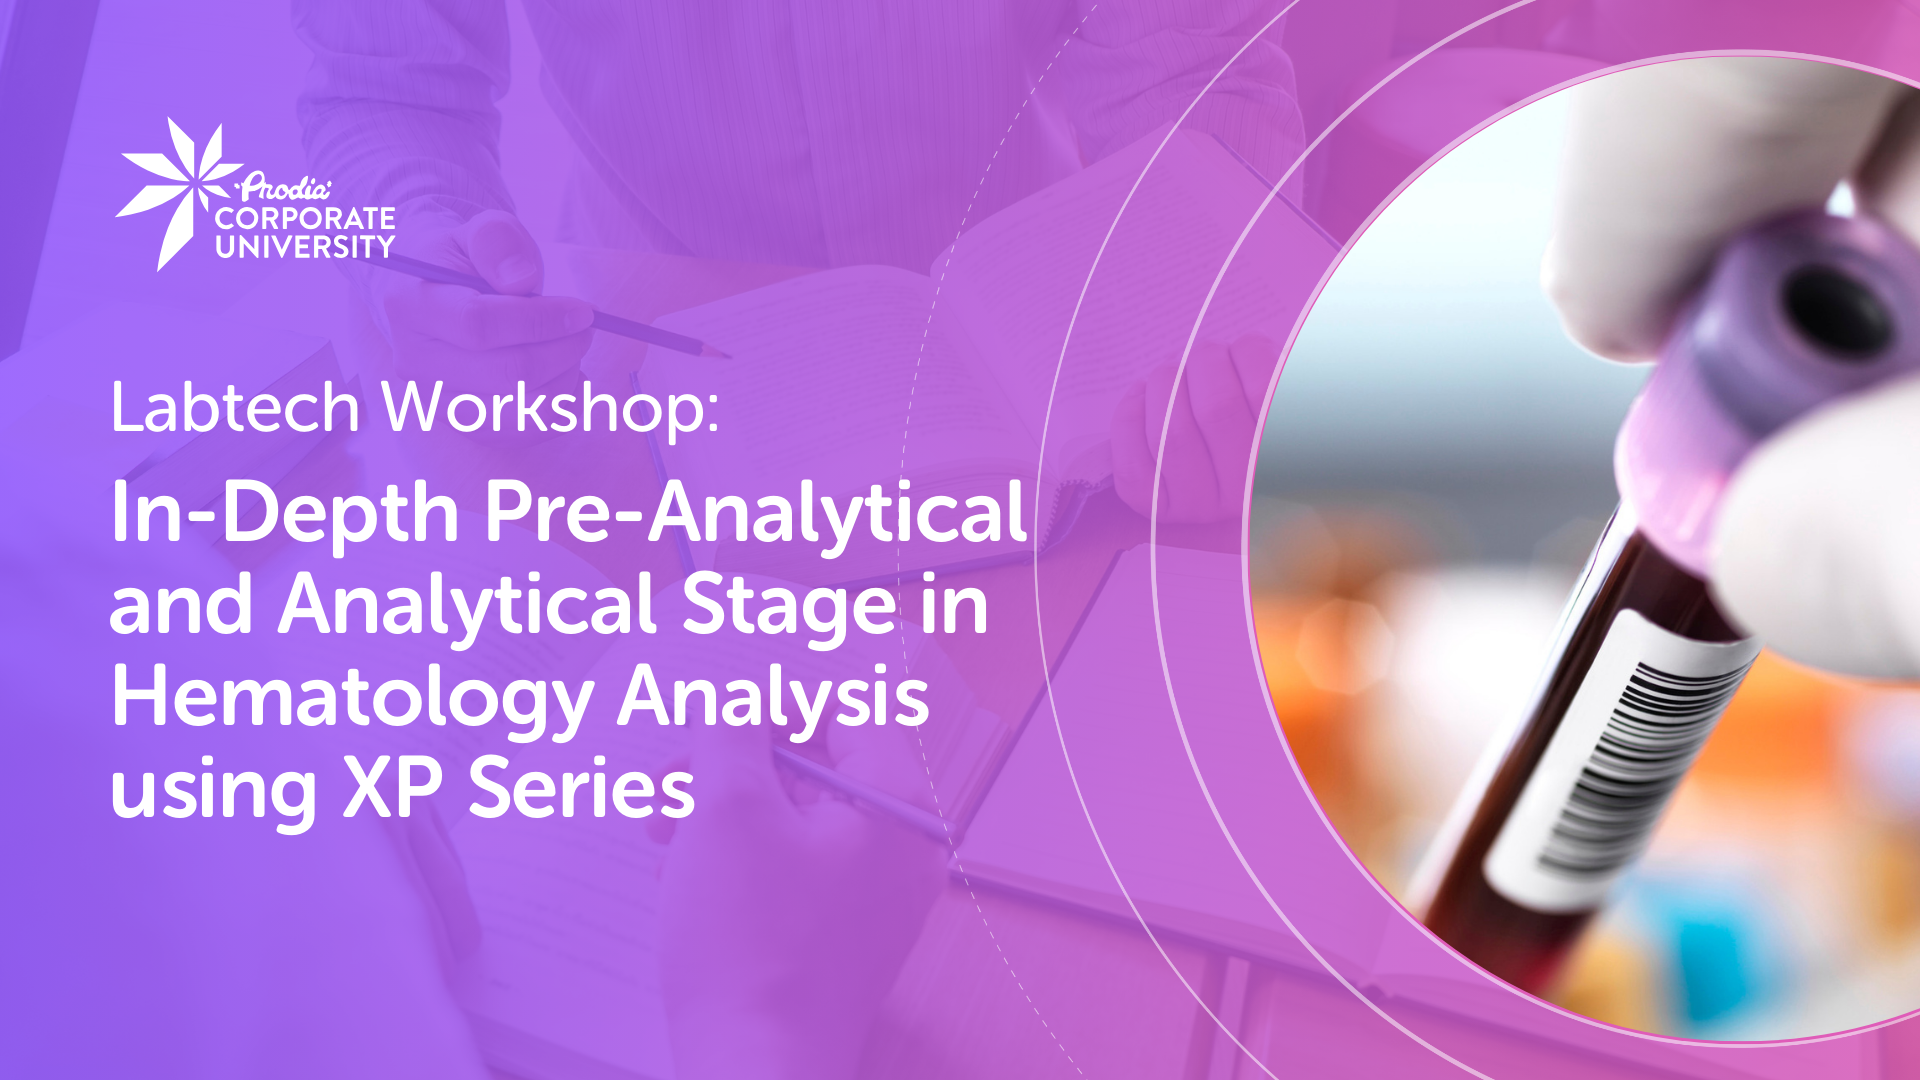 Labtech Workshop: In Depth Pre-Analytical and Analytical Stage in Hematology Analysis Using XP Series